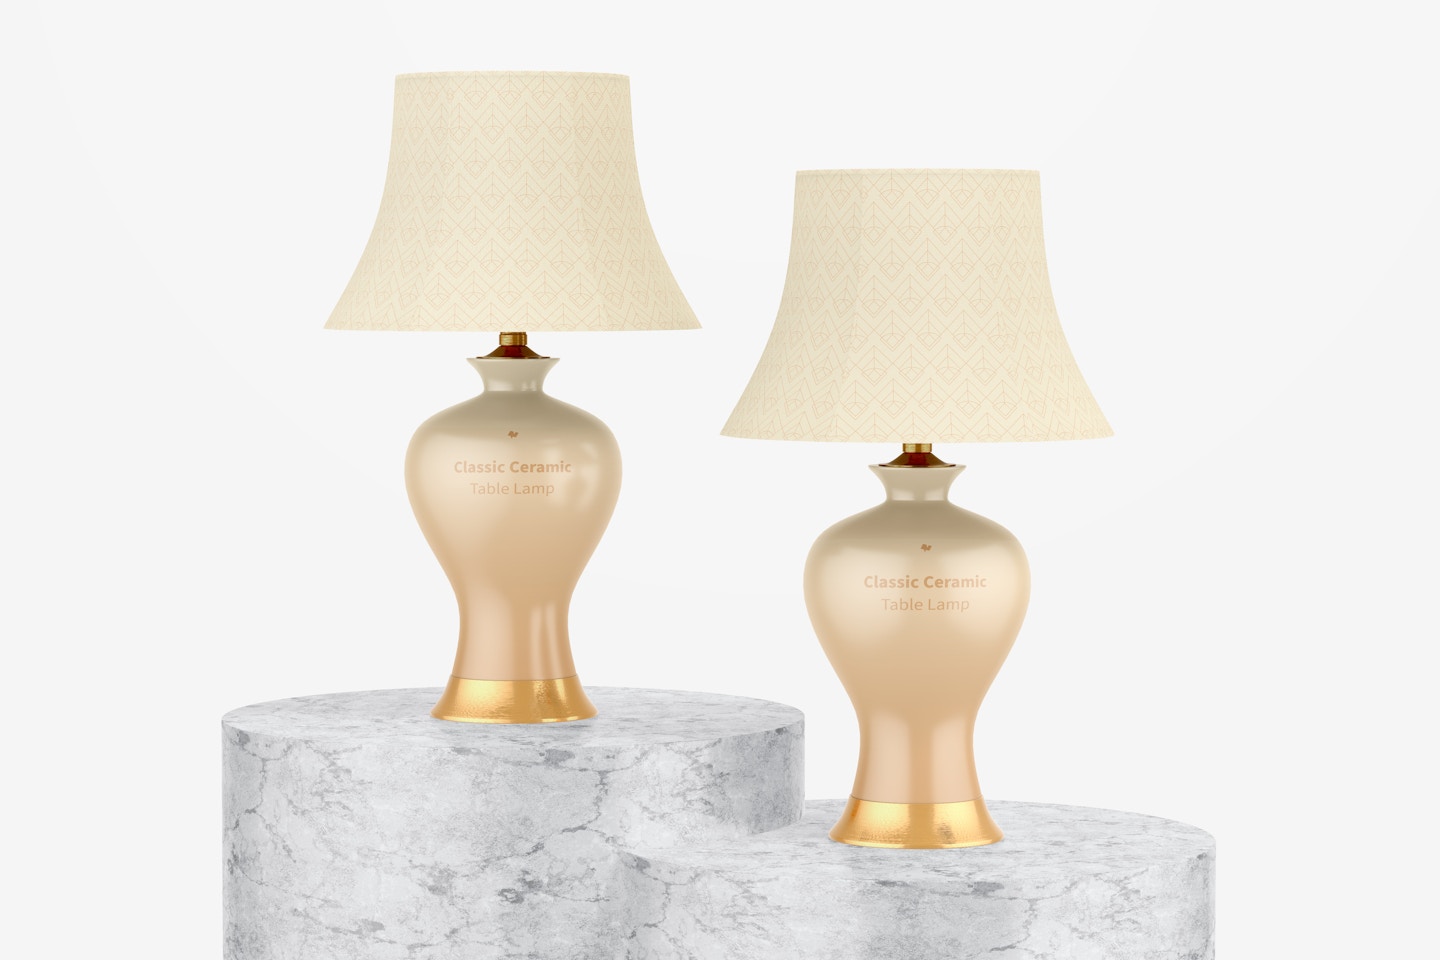 Classic Ceramic Table Lamps Mockup, Perspective